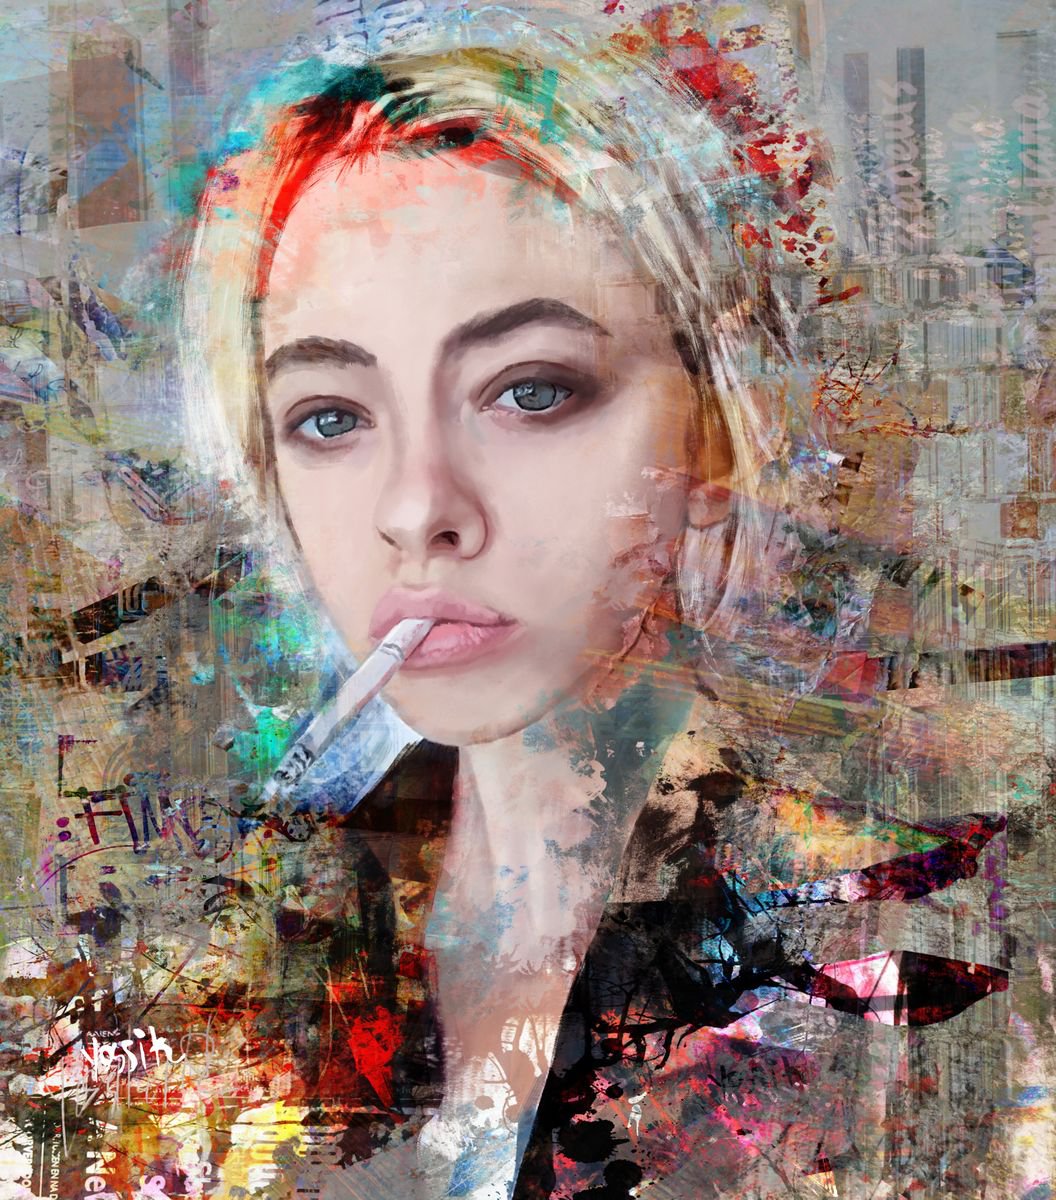 defiance by Yossi Kotler